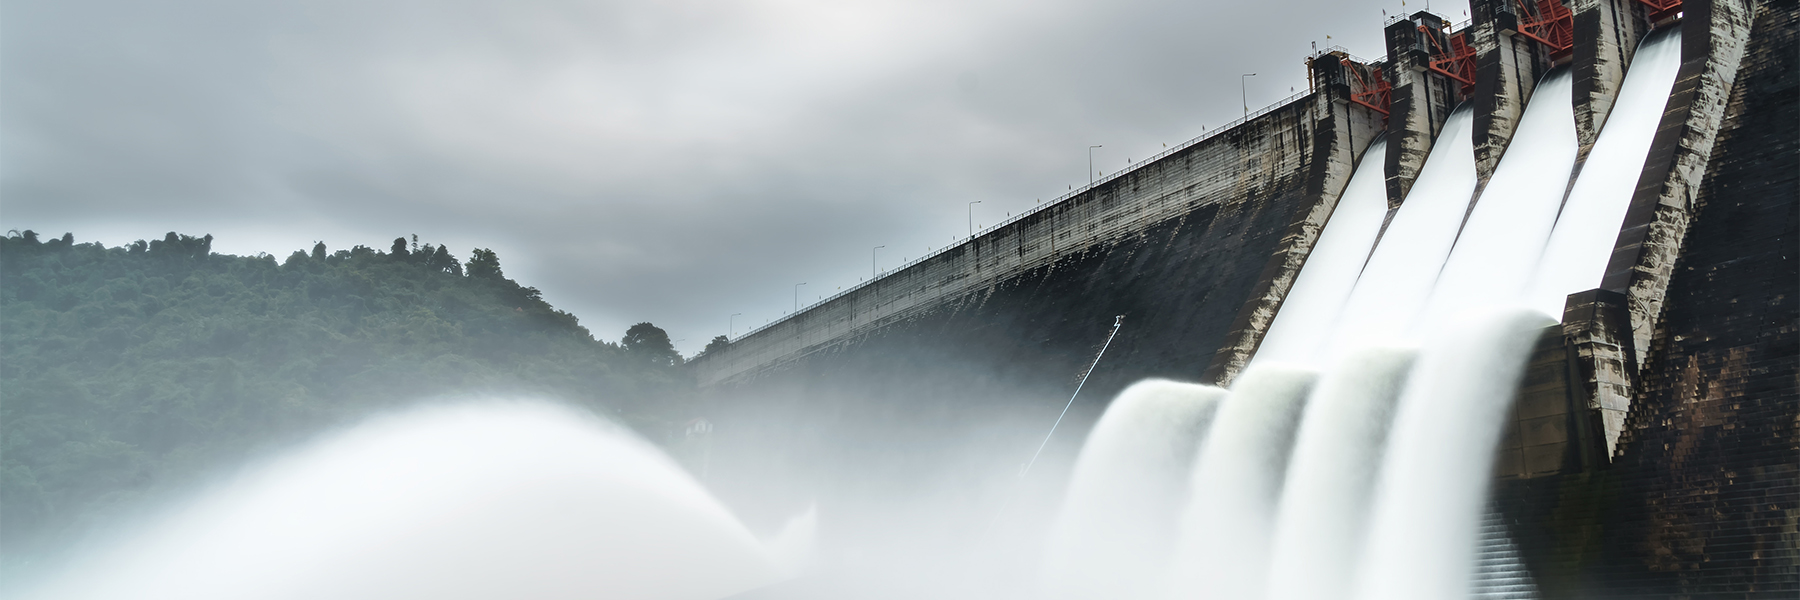 A dam releases a massive amount of water as storm clouds loom. Credit: Adobe Stock